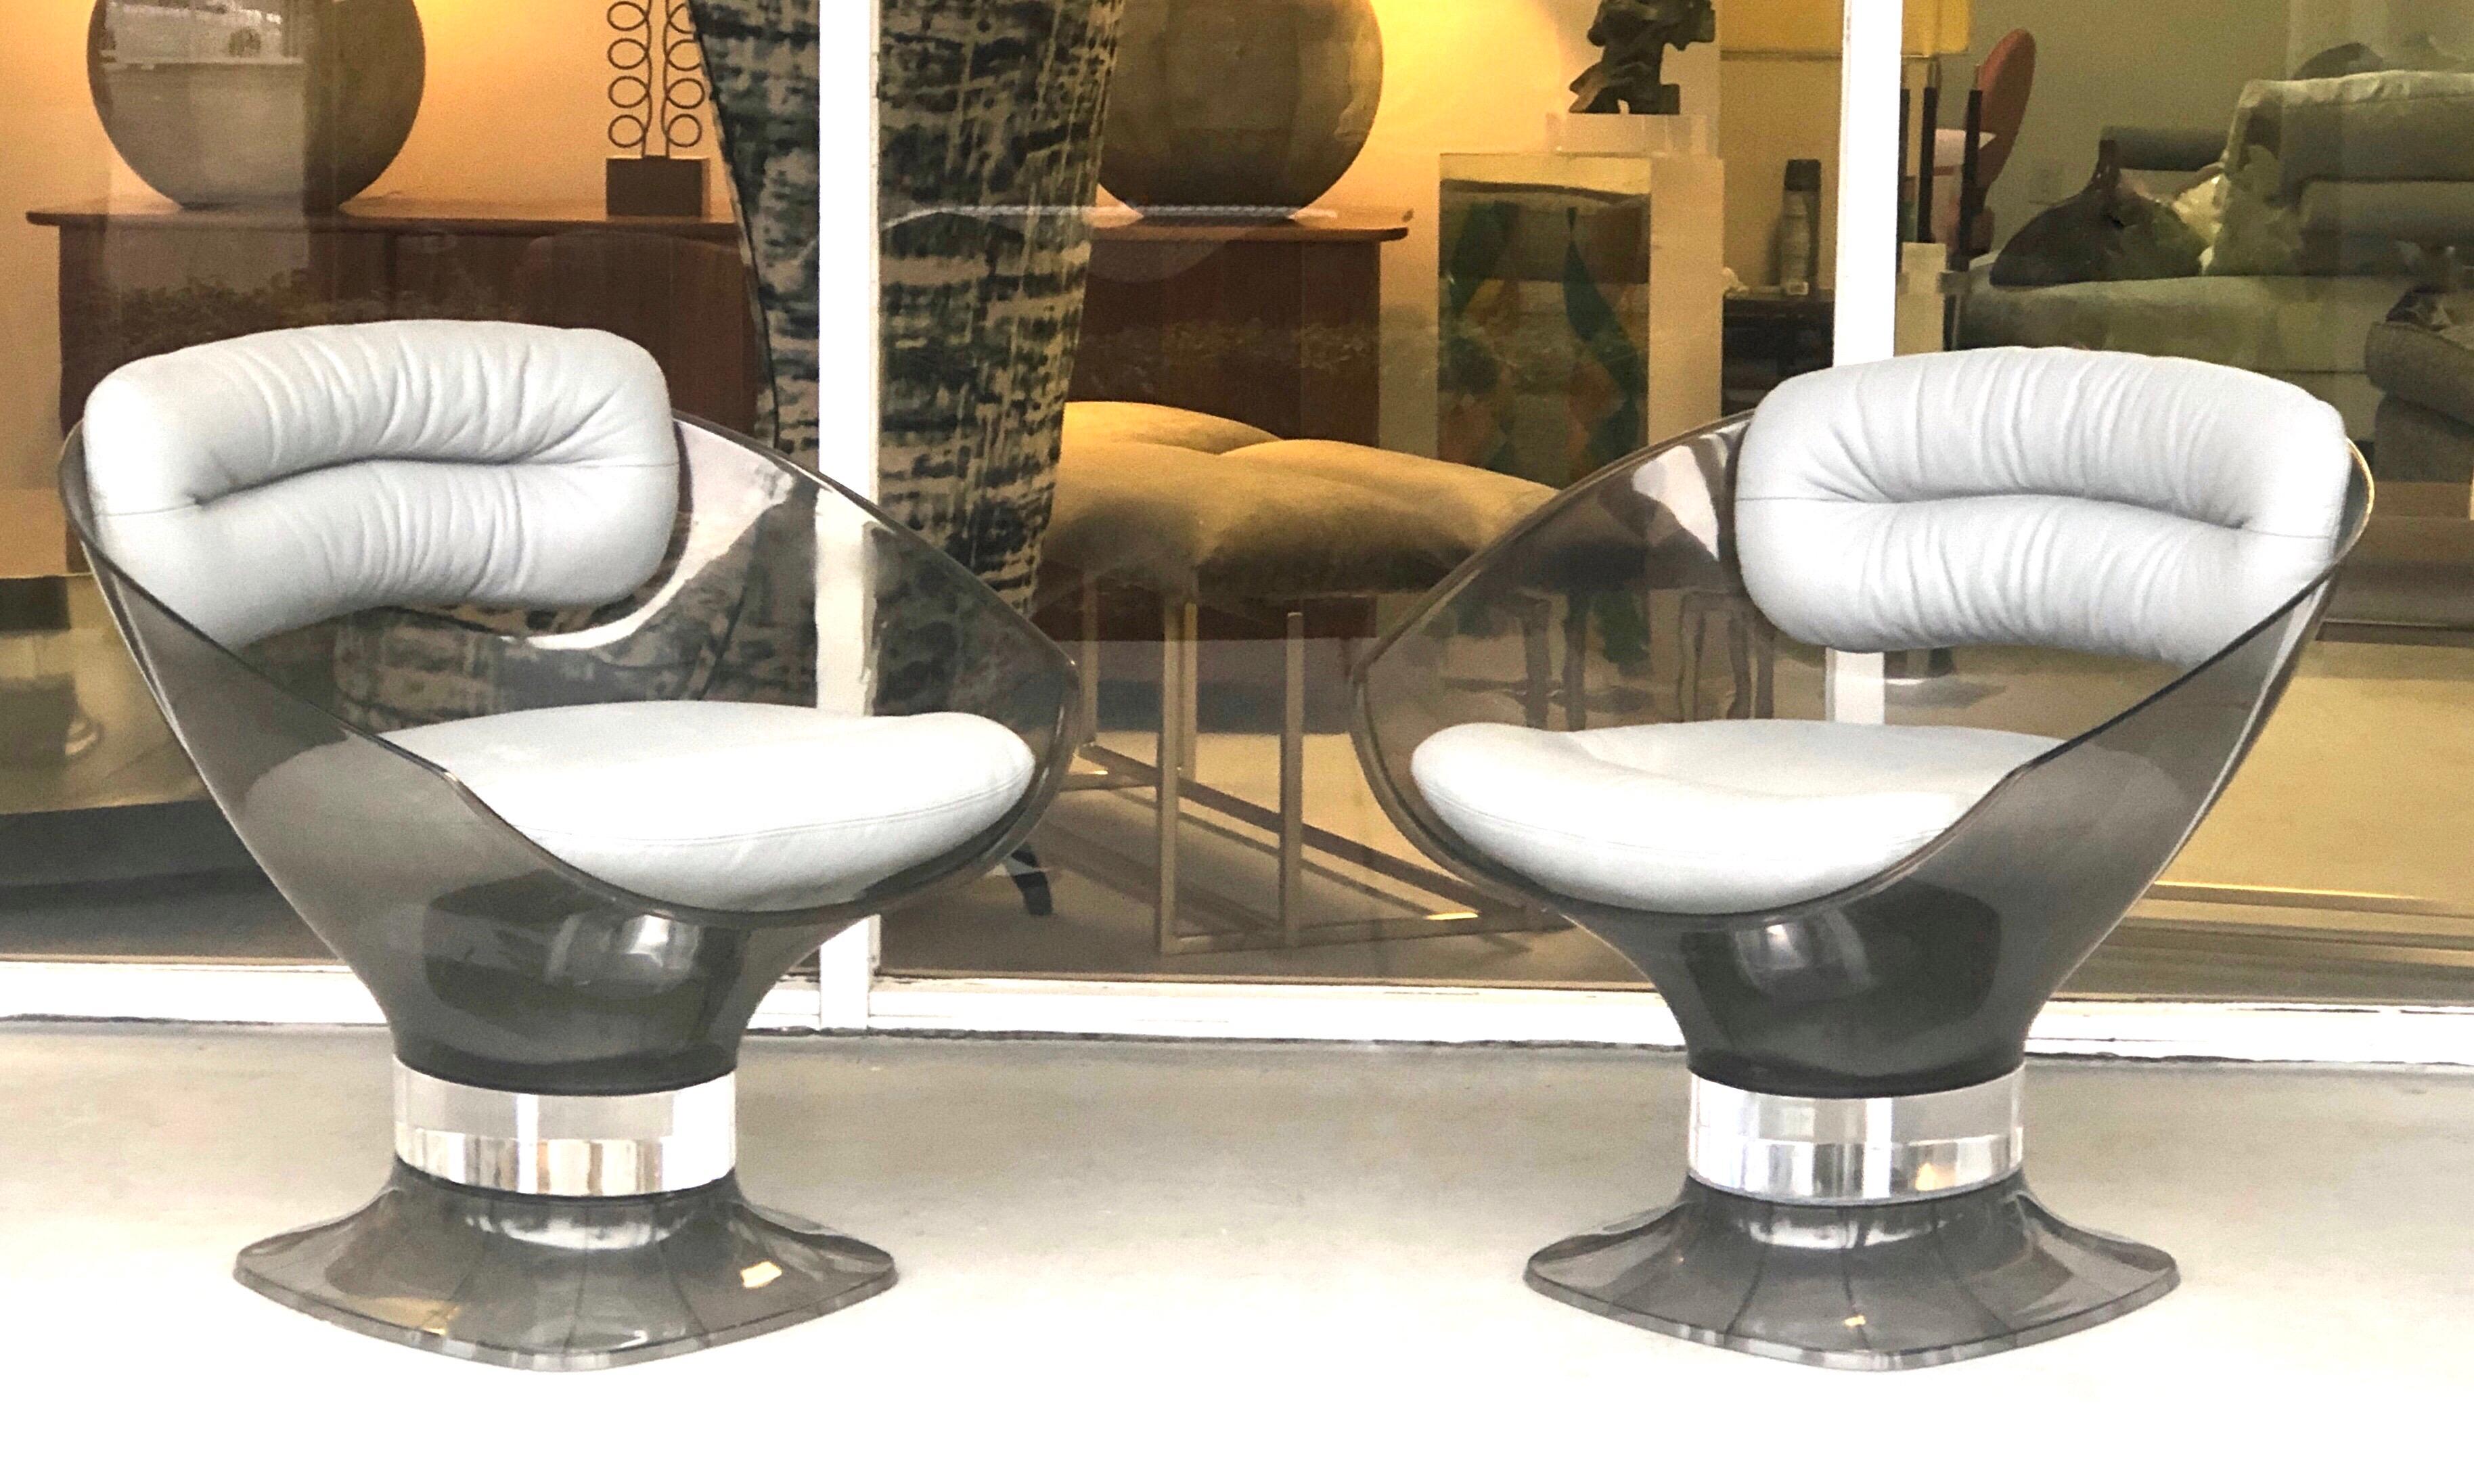 A pair of 1970s chairs. Bronze tone acrylic frames and light gray leather upholstery.